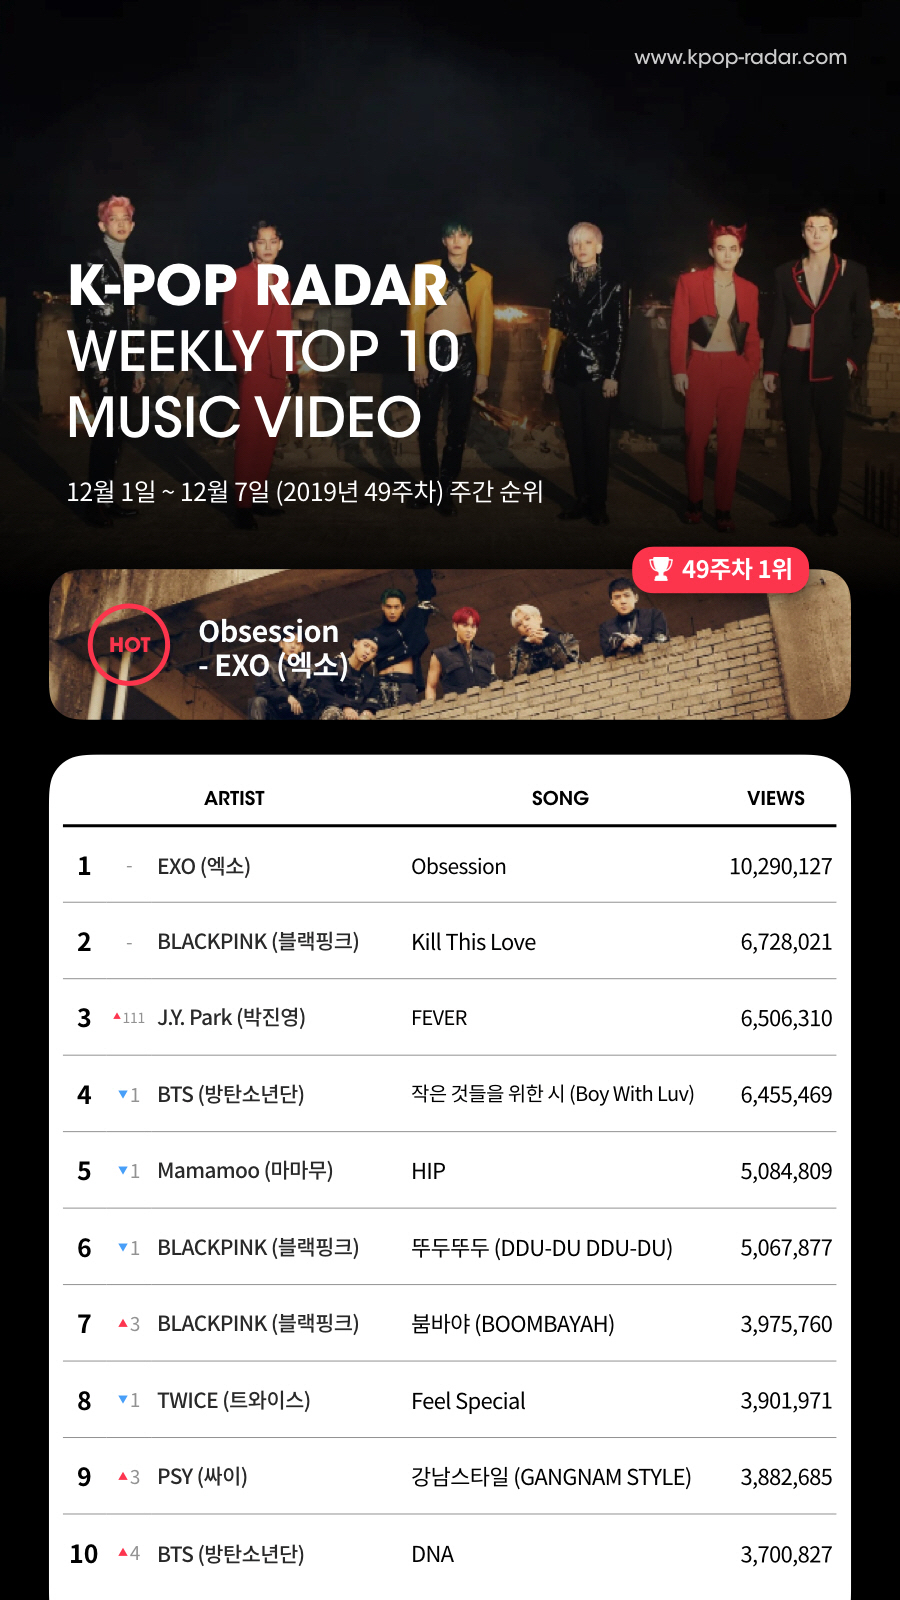 Group EXO topped the Kpop Radar (K-Pop Radar) YouTube views chart for the second consecutive week.EXOs Obsession (Option) has reached number one on the YouTube views chart following the last 48 weeks in Week 49 (December 1-December 7) announced on the 9th, Kpop Radar said.EXO, which has been popular with various music charts and music broadcasts recently, has been on the top of the Kpop Radar YouTube chart for the second consecutive week since last week and has realized its dignity.BLACKPINKs Kill This Love also remained in the second place in the same week as last week, and boasted global popularity.J. Y. Park, who released his new song FEVER on the 30th, added 6,506,310 views of YouTube views during the aggregate period and attracted attention.Kpop Radar said, It is very unusual for J. Y. Park, who has been in the 26th year of debut this year, to be in third place on the YouTube Weekly Viewing chart, where Idol is active. If it is a trend now, it will be possible to see 10 million views.In addition, TOP10 includes BTSs Poetry for Small Things (6.45 million views), Mamamus HIP (5.08 million views), BLACKPINKs Tudududududududududududu (5.06 million views), BLACKPINKs Bombaya (3.97 million views), Twices Feel Special (3.9 million views), Cys Gangnam Style (3.88 million views) View), BTSs DNA (3.7 million views) were named in turn.Meanwhile, Kpop Radar, founded by Music Startup Space Audit, has released weekly charts based on the number of YouTube views viewed around the world over the past week, and has collected topics by releasing 2019 K-POP World Map through aggregate data.You can check the overall rankings outside the top 10 through the Kpop Radar site, and you can also check the follower charts of Instagram, Twitter, Facebook, and fan cafes.